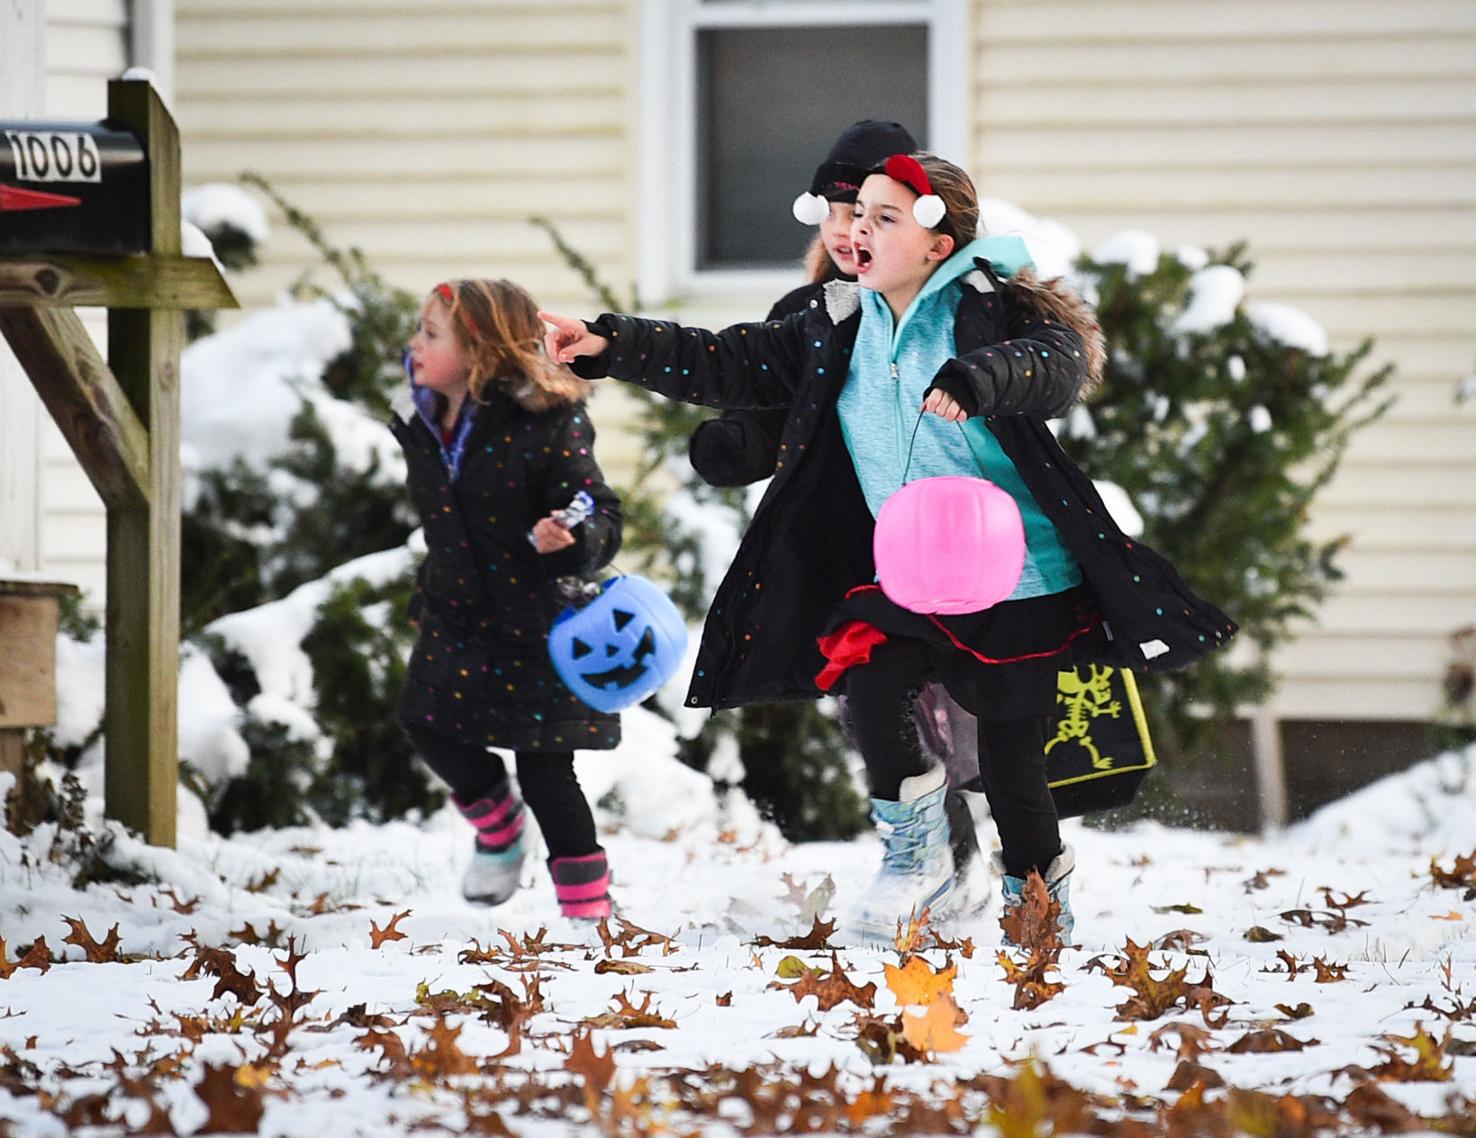 Trickortreat hours set in Moline, Bettendorf and Davenport